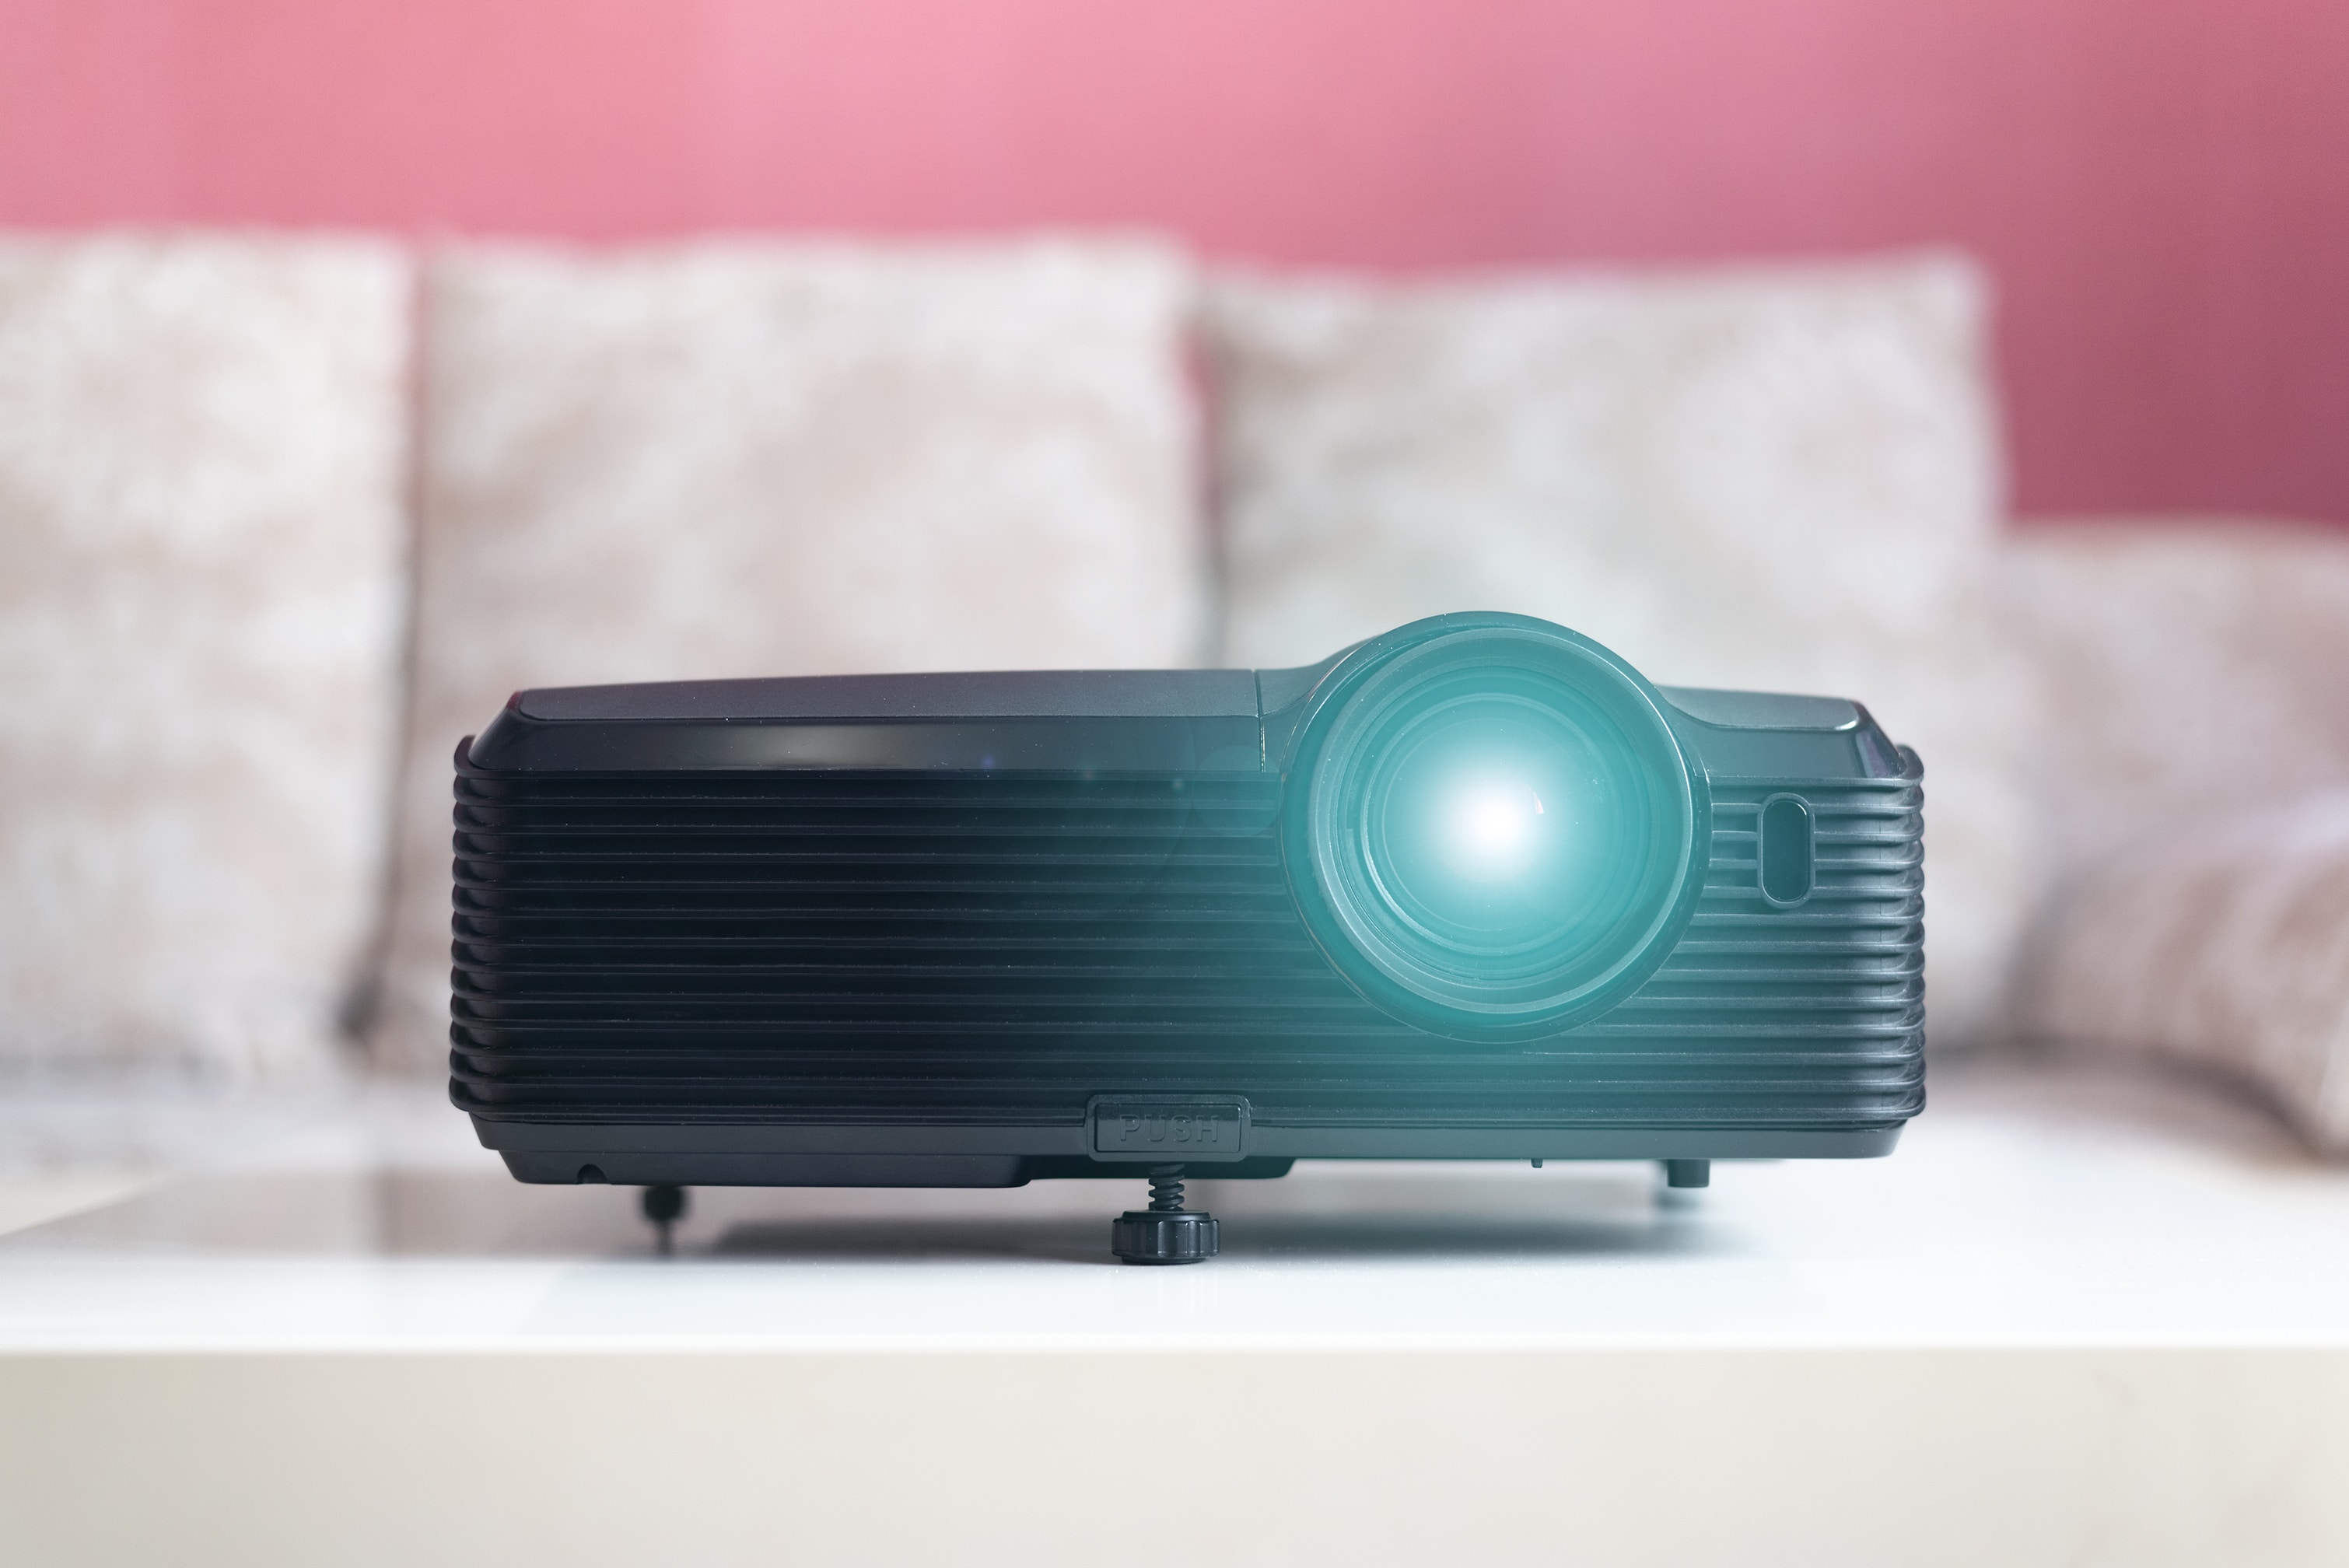 Are Cheap Projectors Any Good?